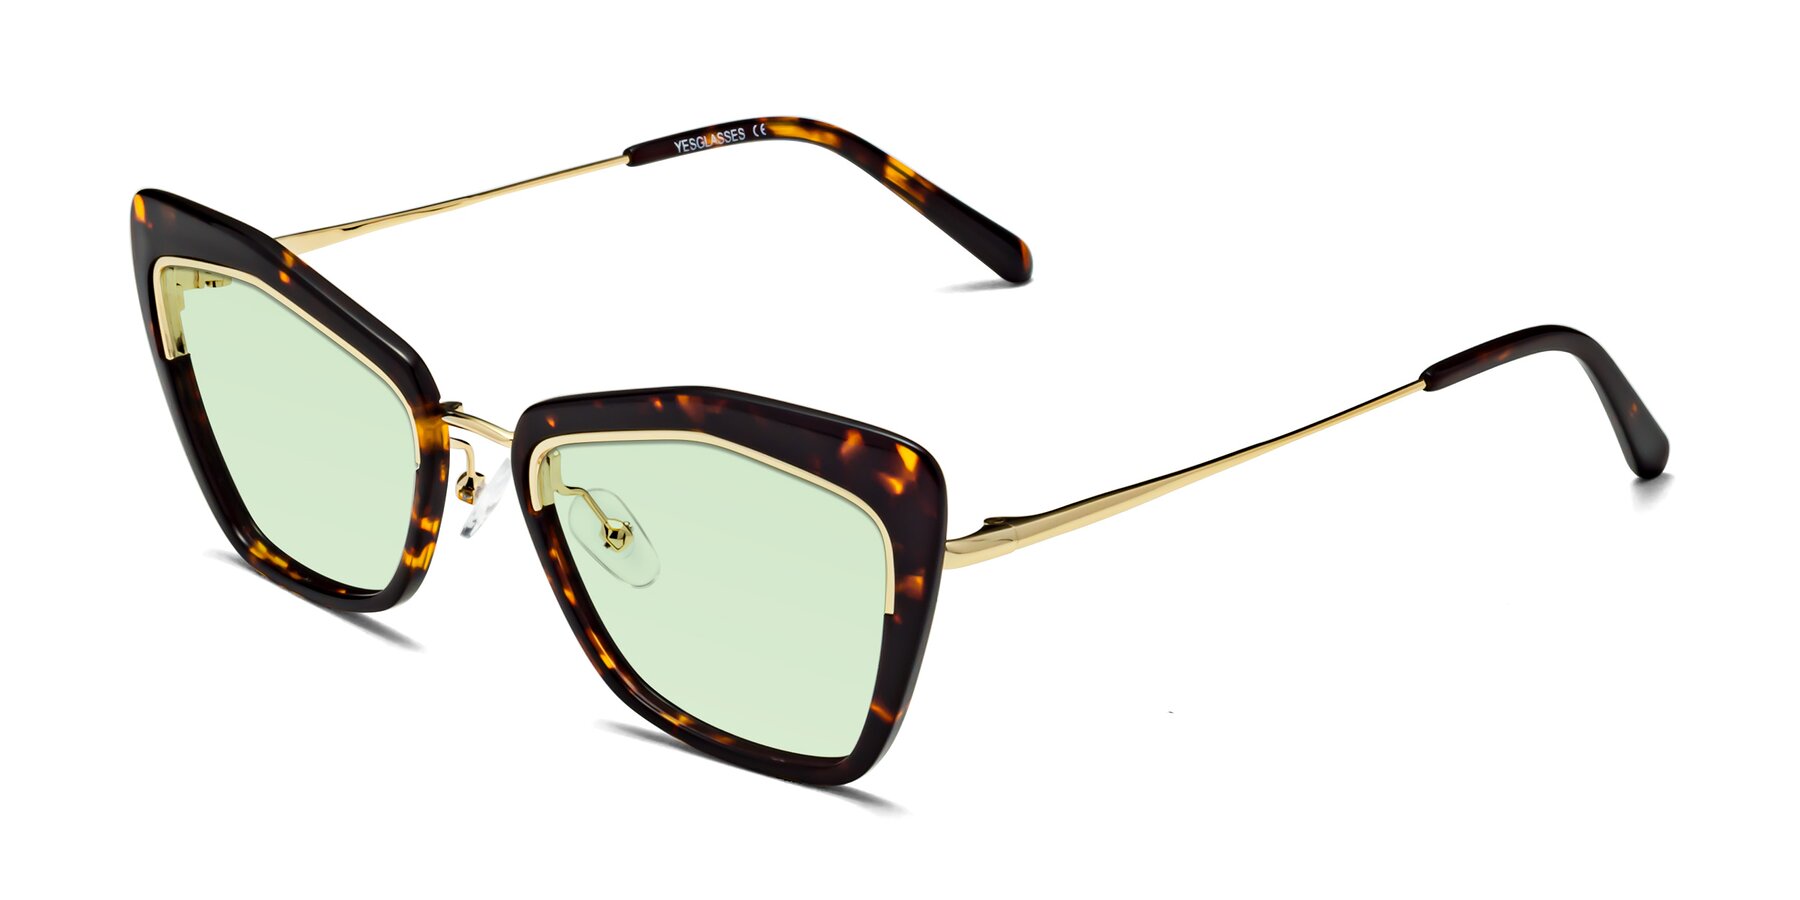 Angle of Lasso in Deep Tortoise with Light Green Tinted Lenses